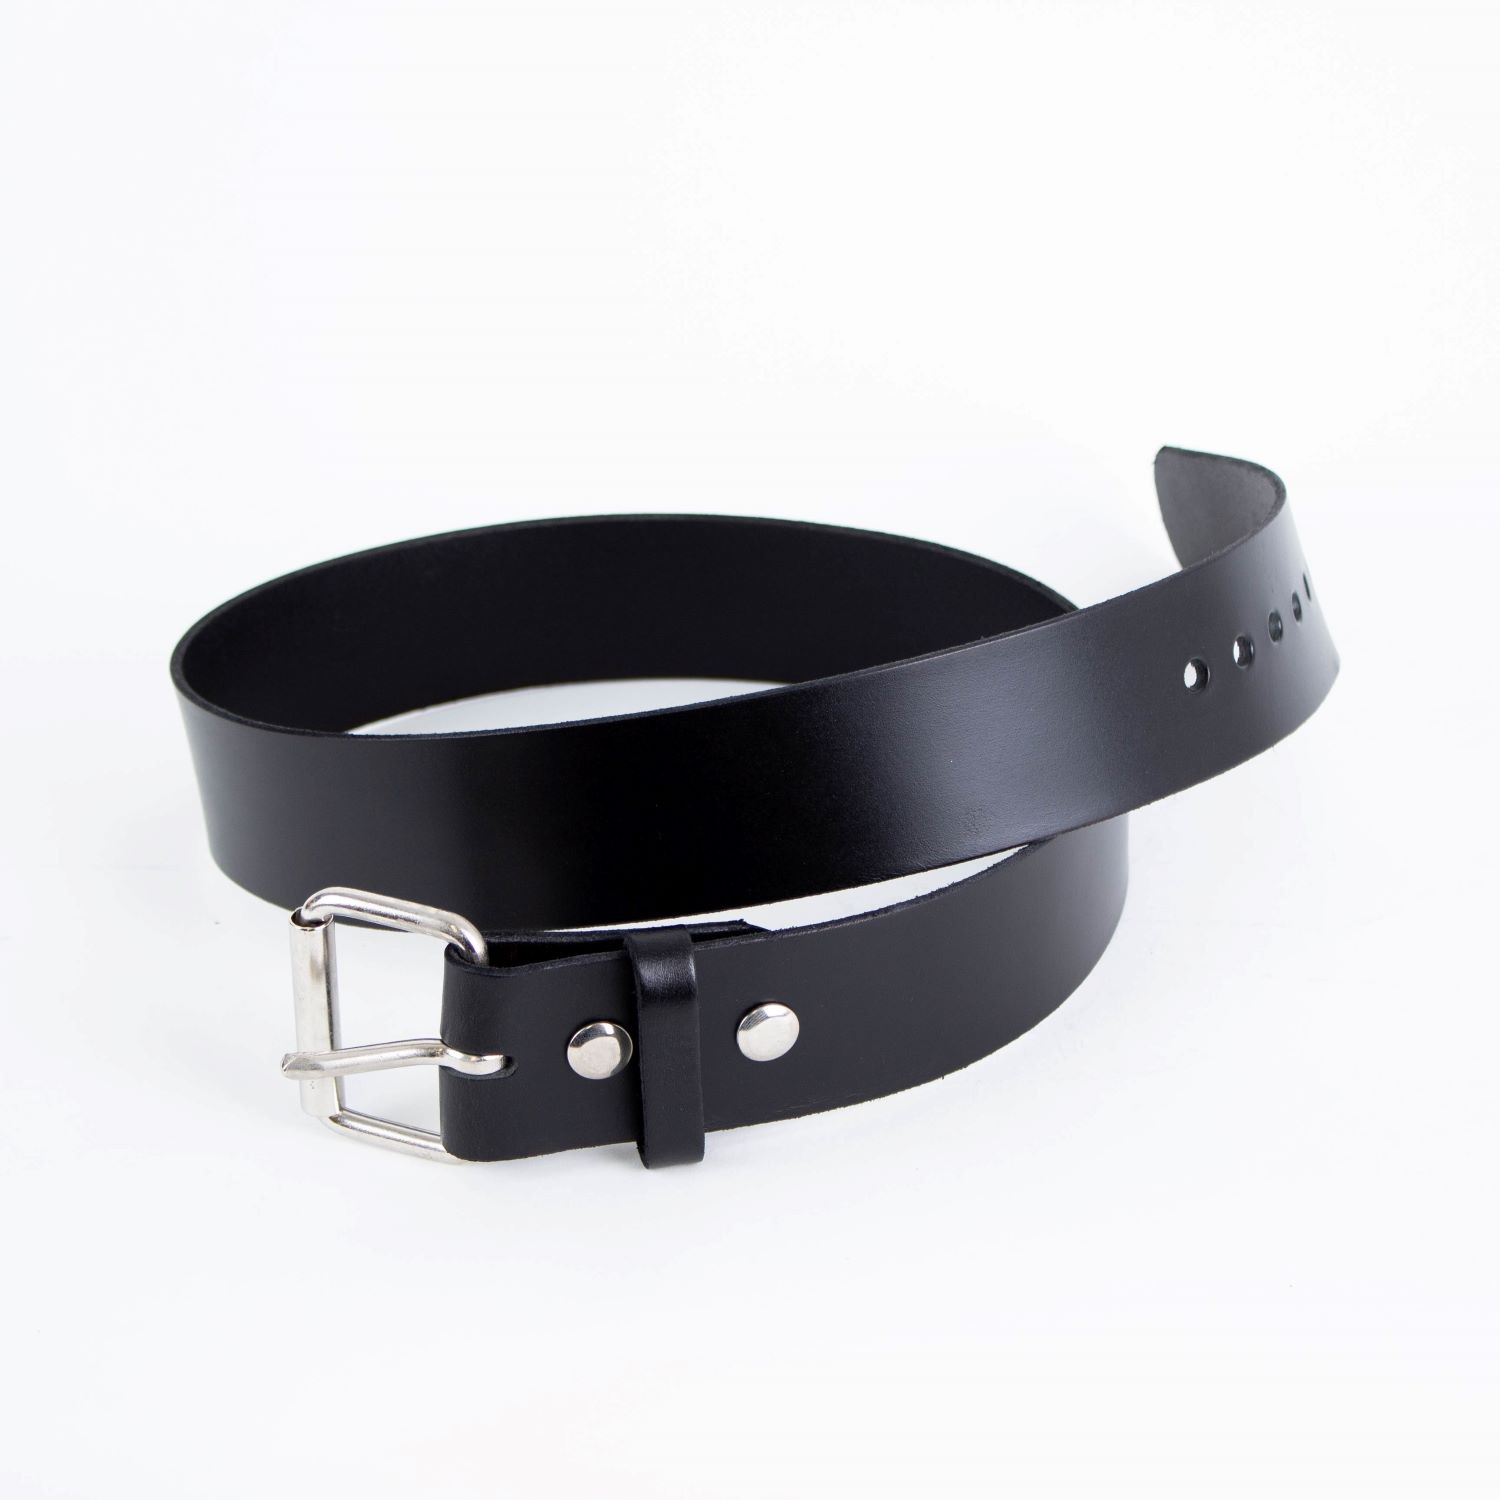 Amish-Made Casual/Work Leather Belts - 2 inch Wide - Black 50